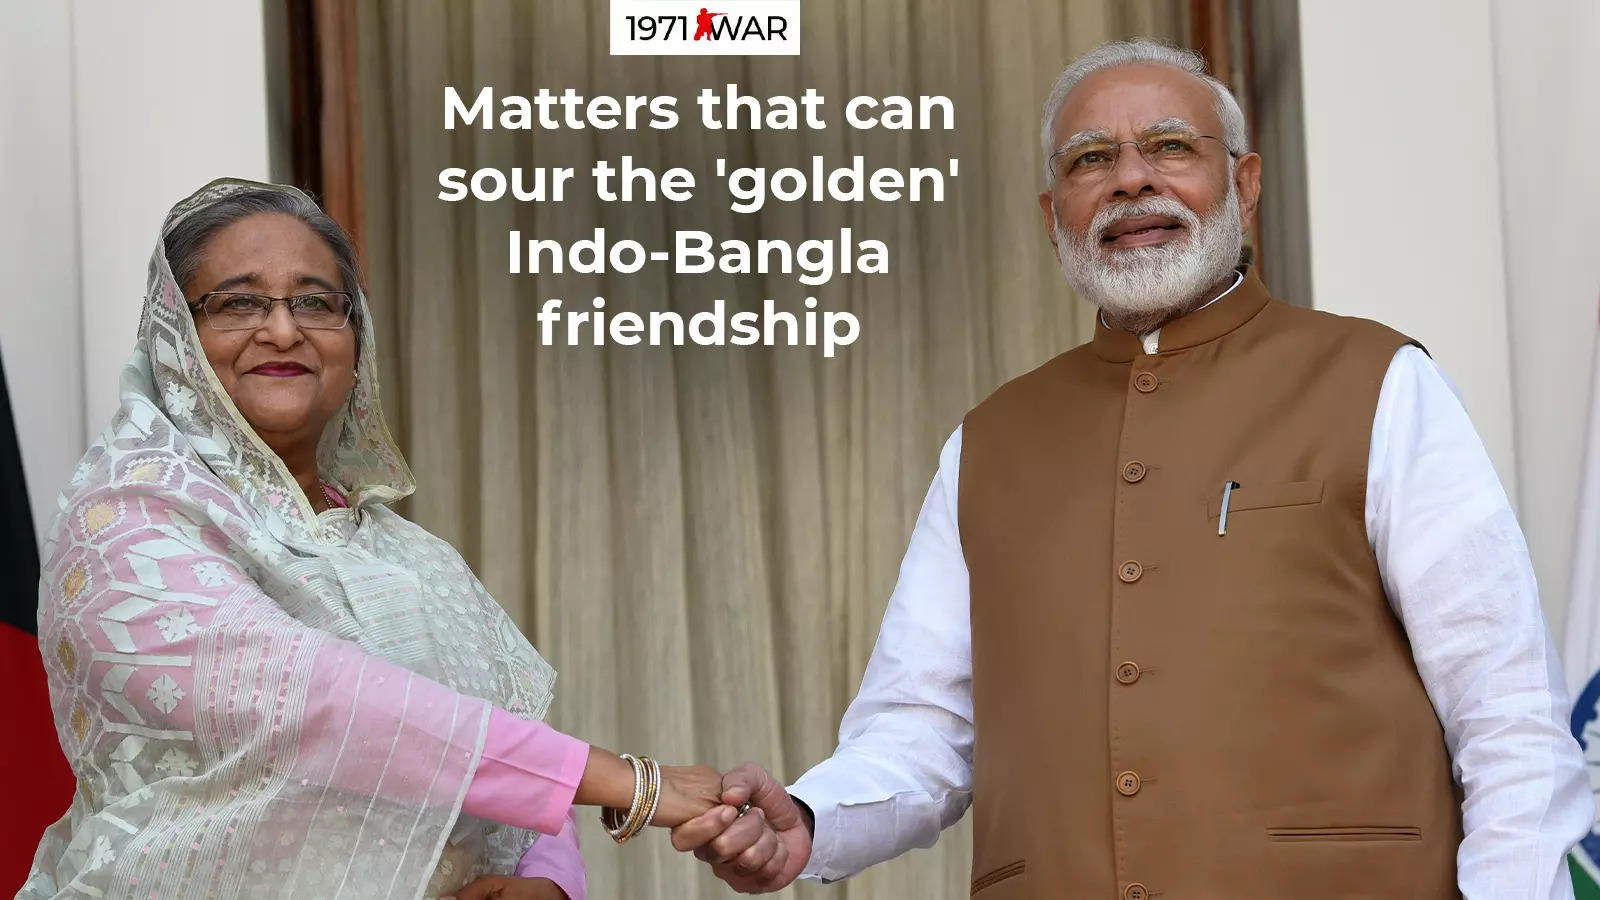 Matters that can sour the 'golden' Indo-Bangla friendship - Times of India